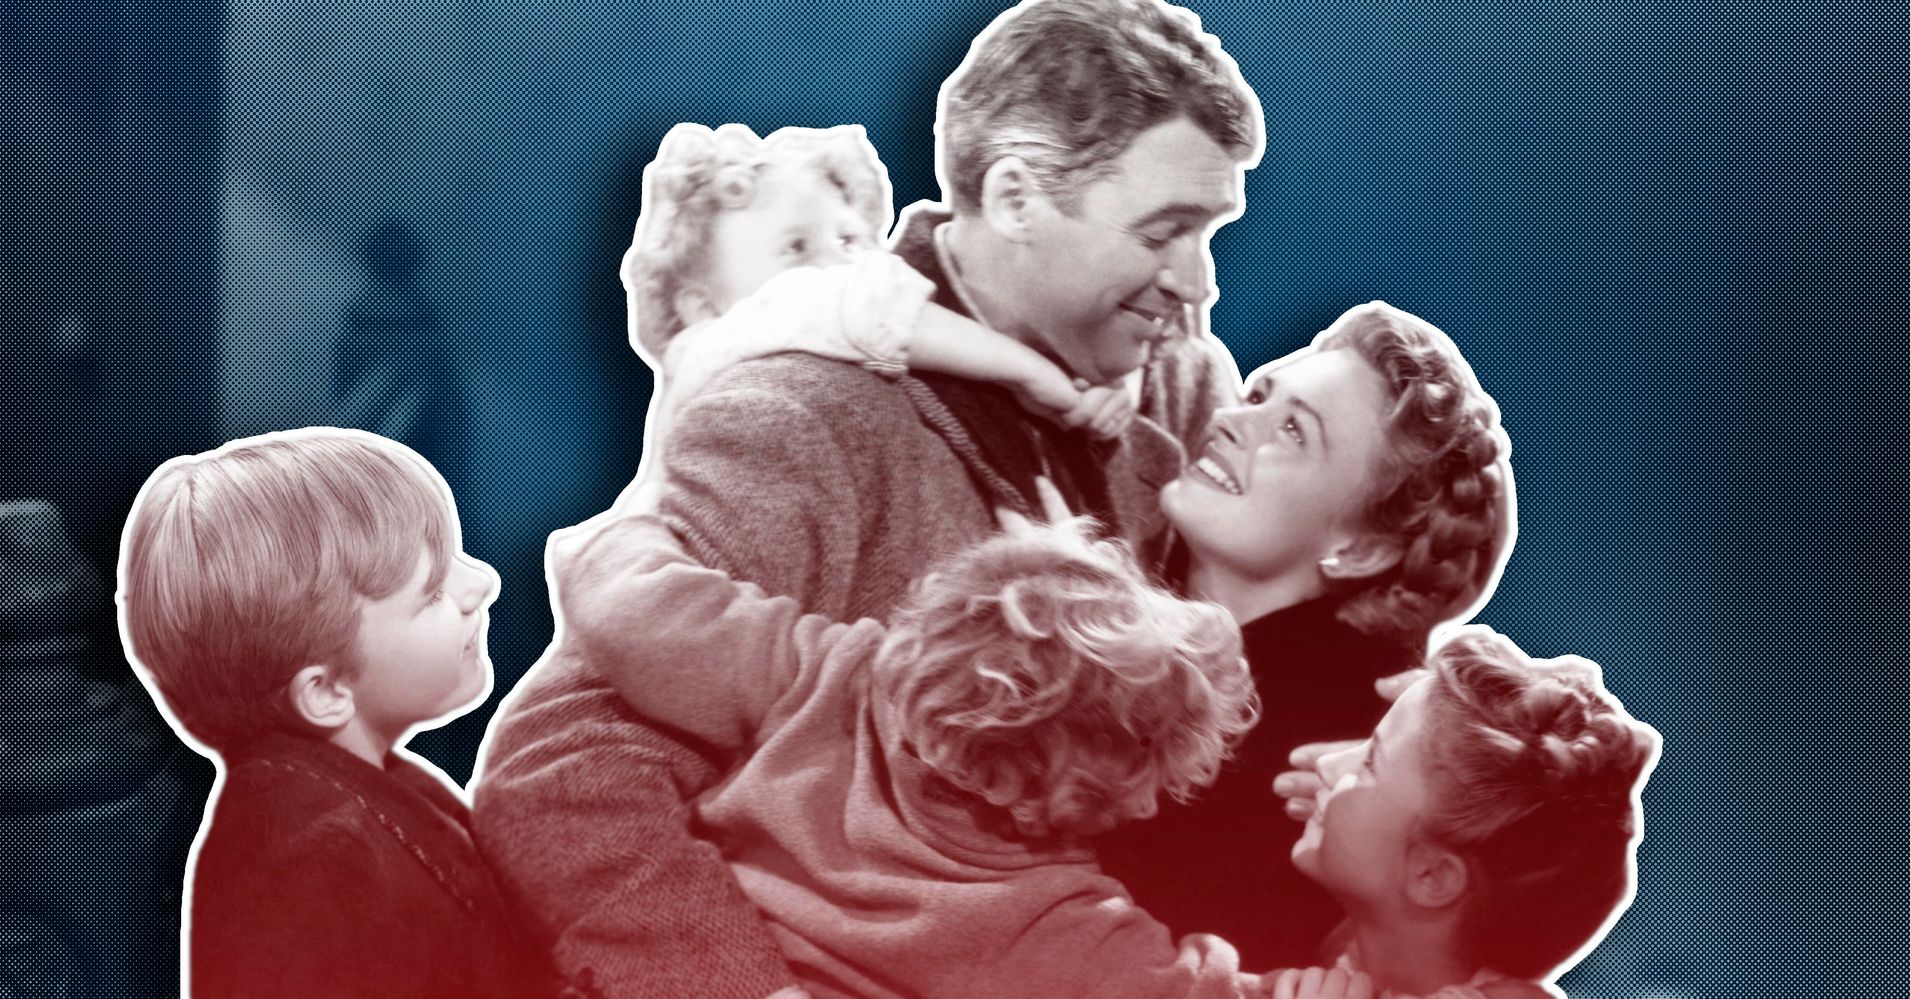 It's A Wonderful Life: The Miraculous Origins Of A Christmas Classic ...